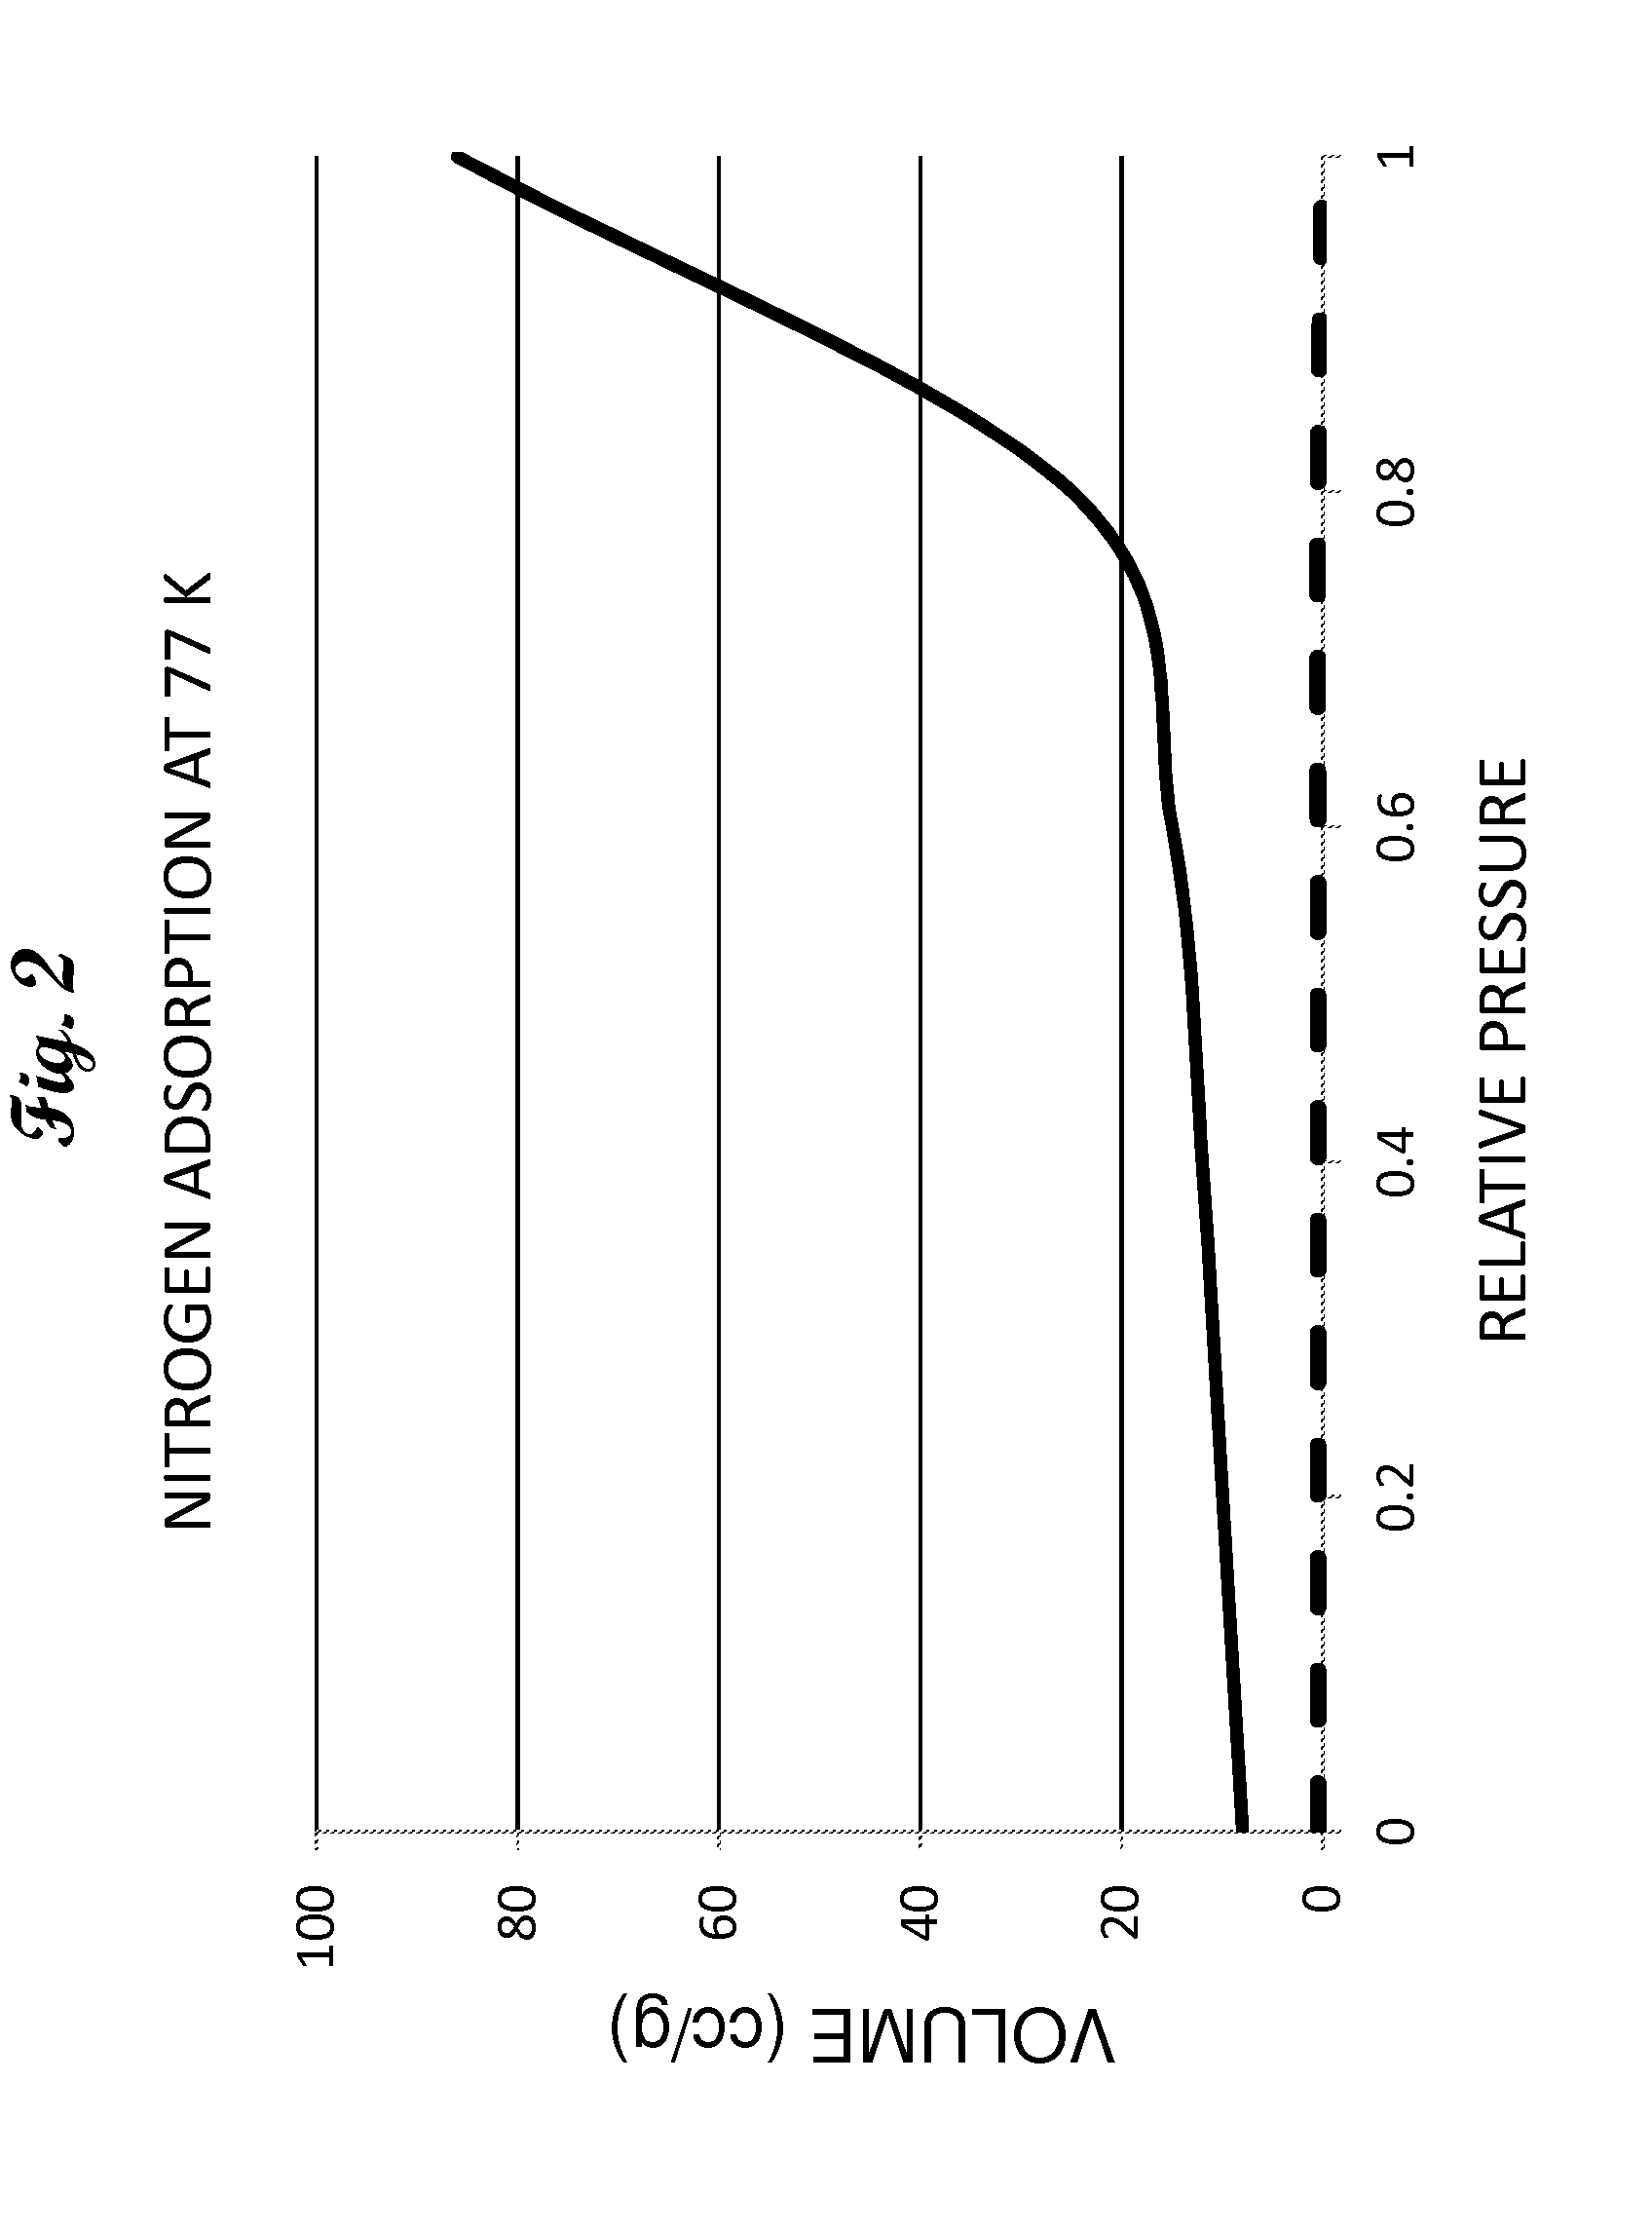 Method for removing sulfur compounds from sour gas streams and hydrogen rich streams